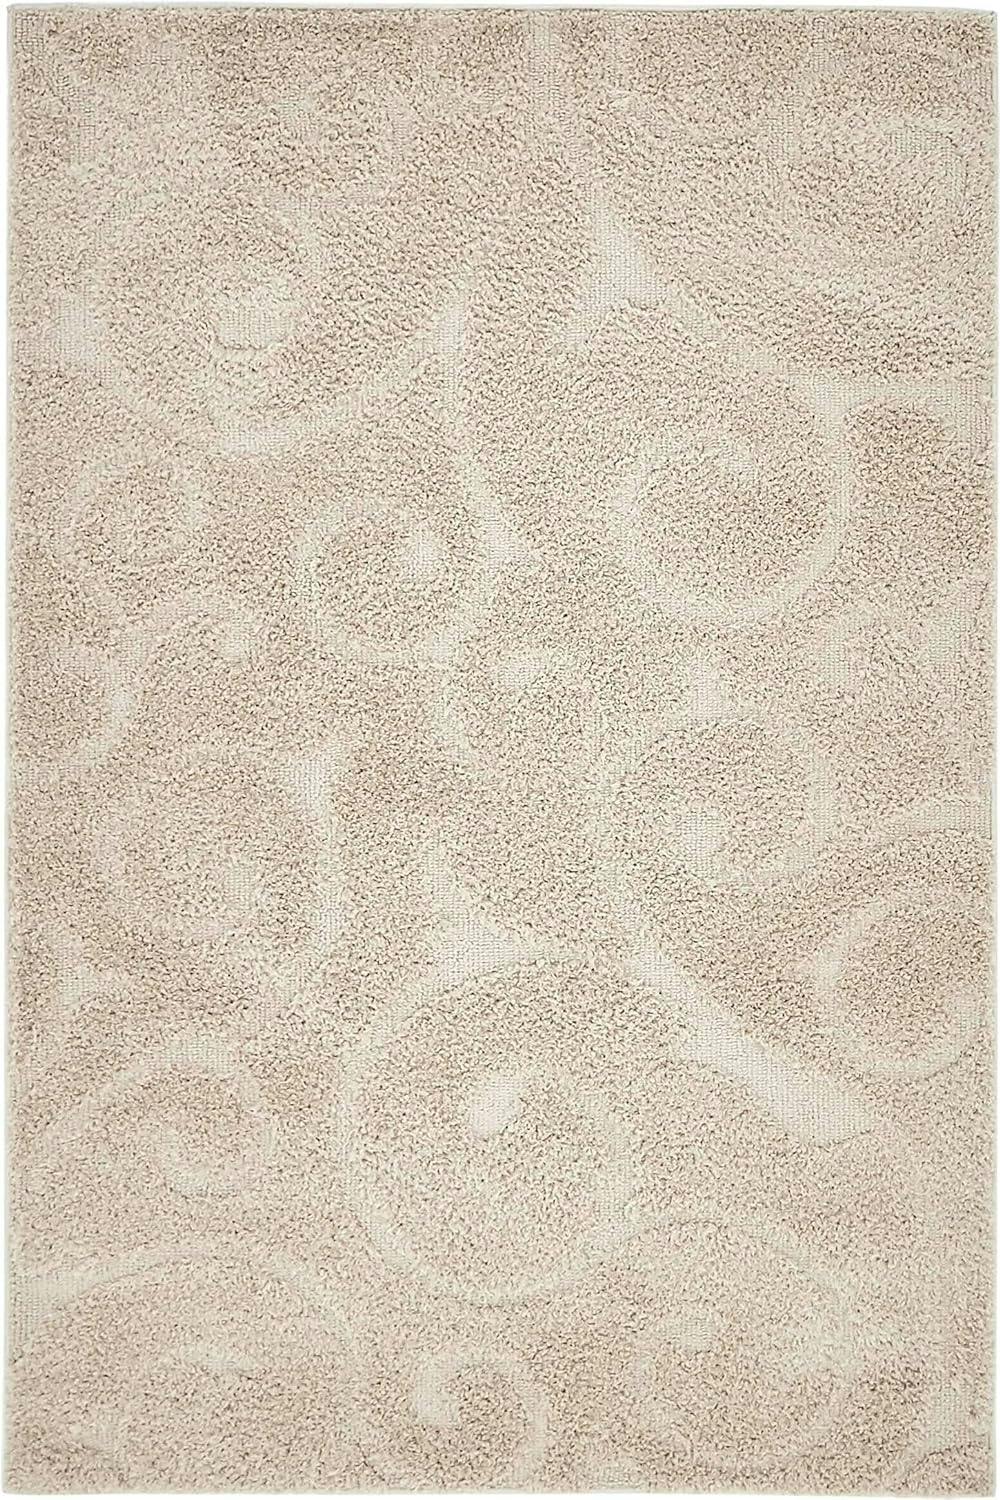 Elegant Beige Floral Shag Area Rug, 4' x 6', Easy Care Synthetic